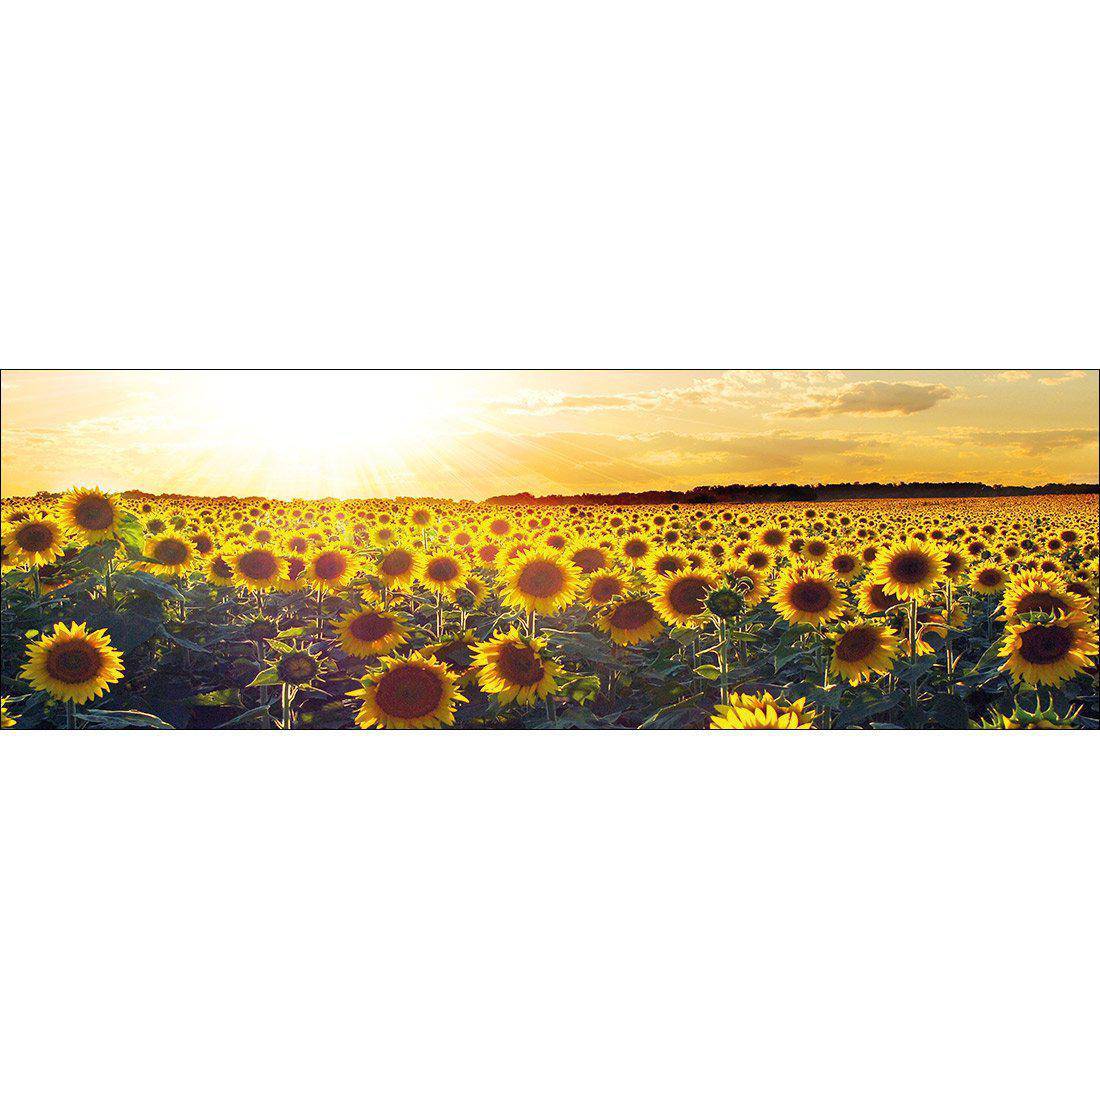 Sunflowers At Sunset Canvas Art-Canvas-Wall Art Designs-60x20cm-Canvas - No Frame-Wall Art Designs